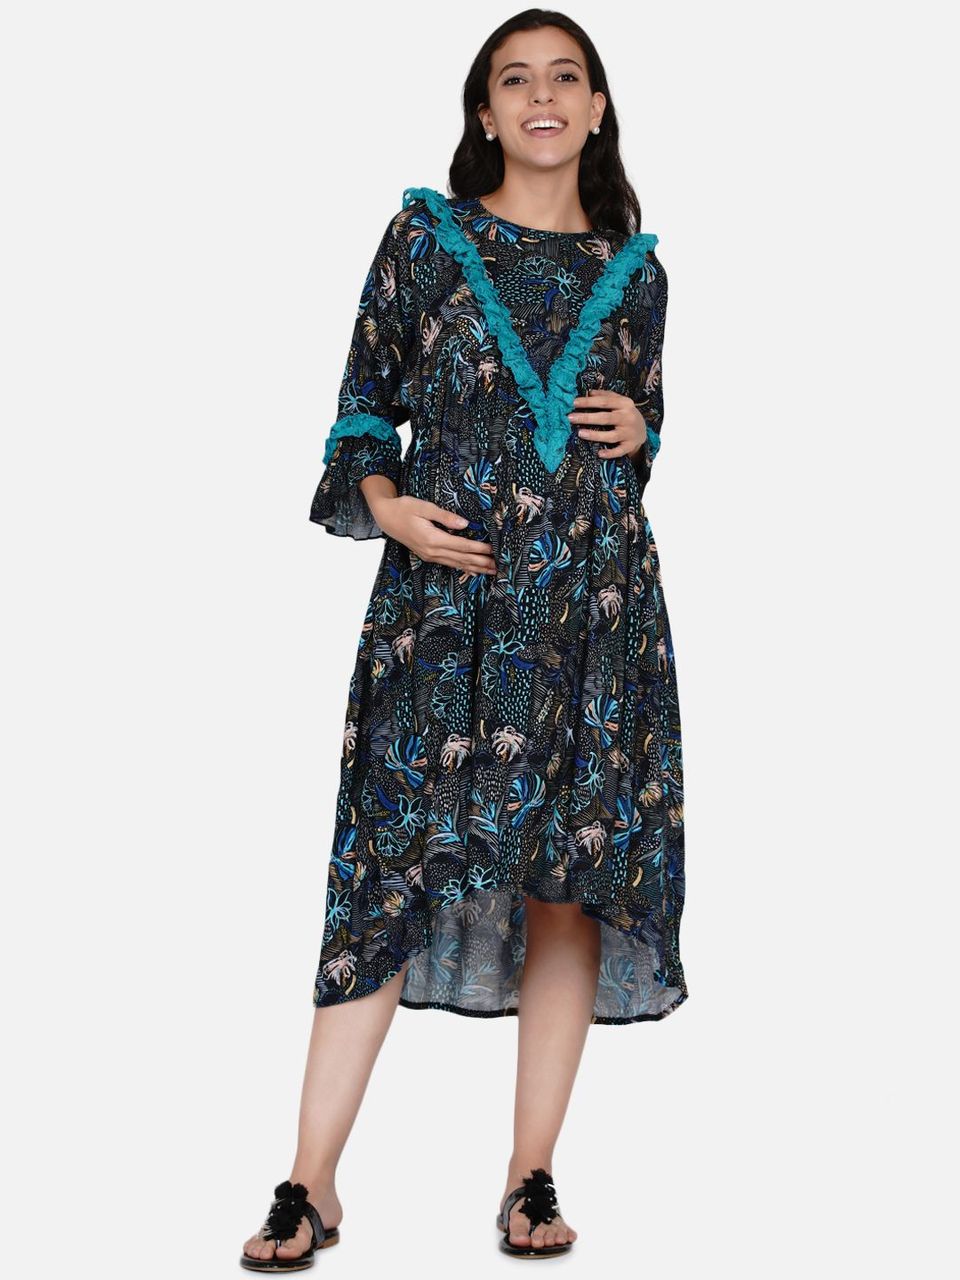 The Kaftan Company-Blue Floral Lacey Hi-Low Maternity and Nursing Dress